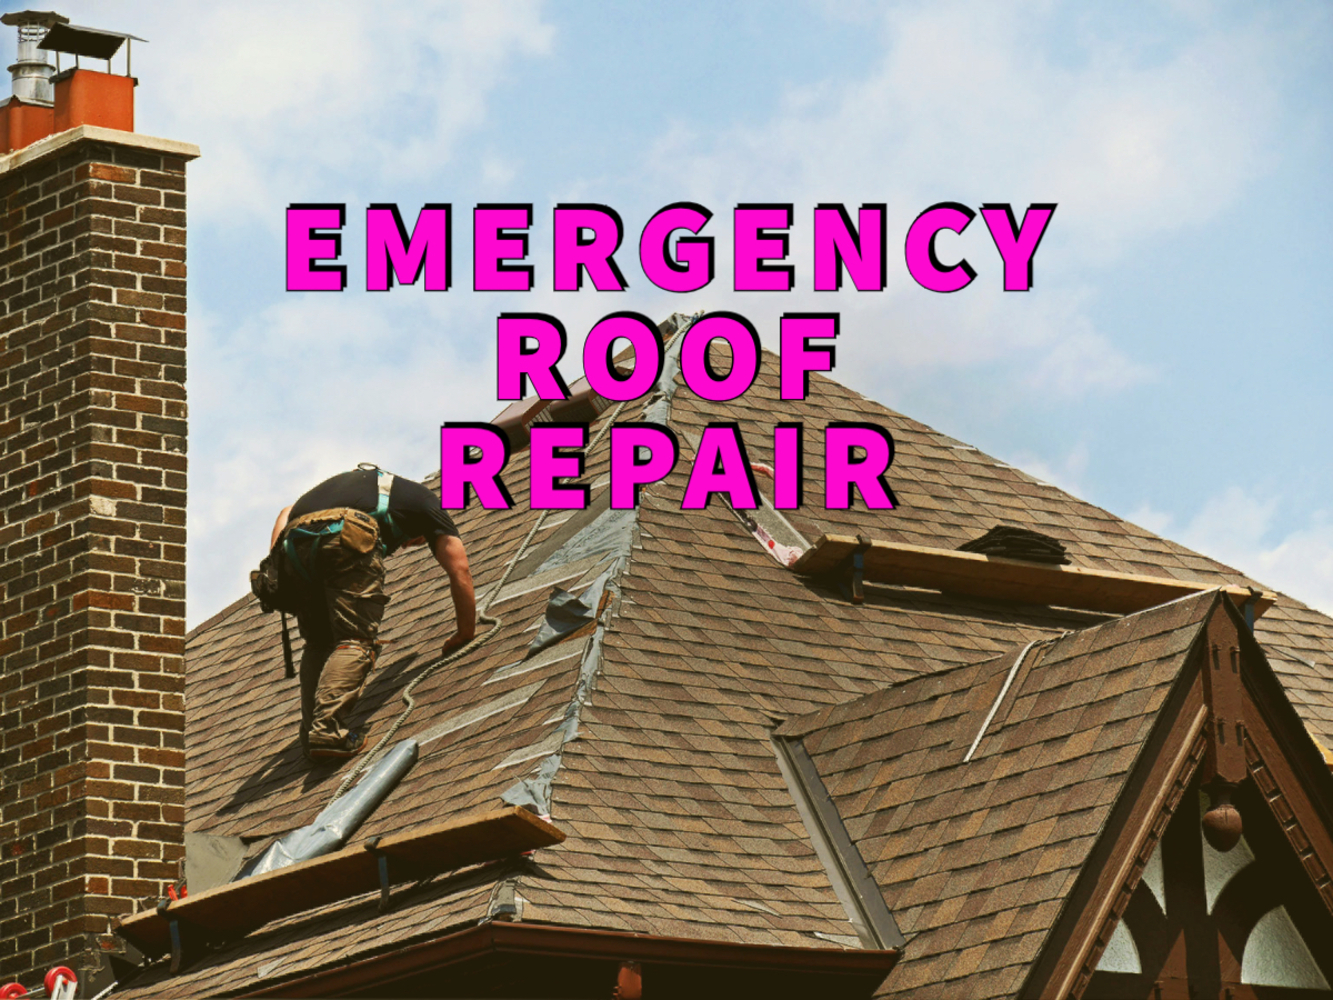 emergency roof repair written in pink over man climbing onto temporarily patched roof